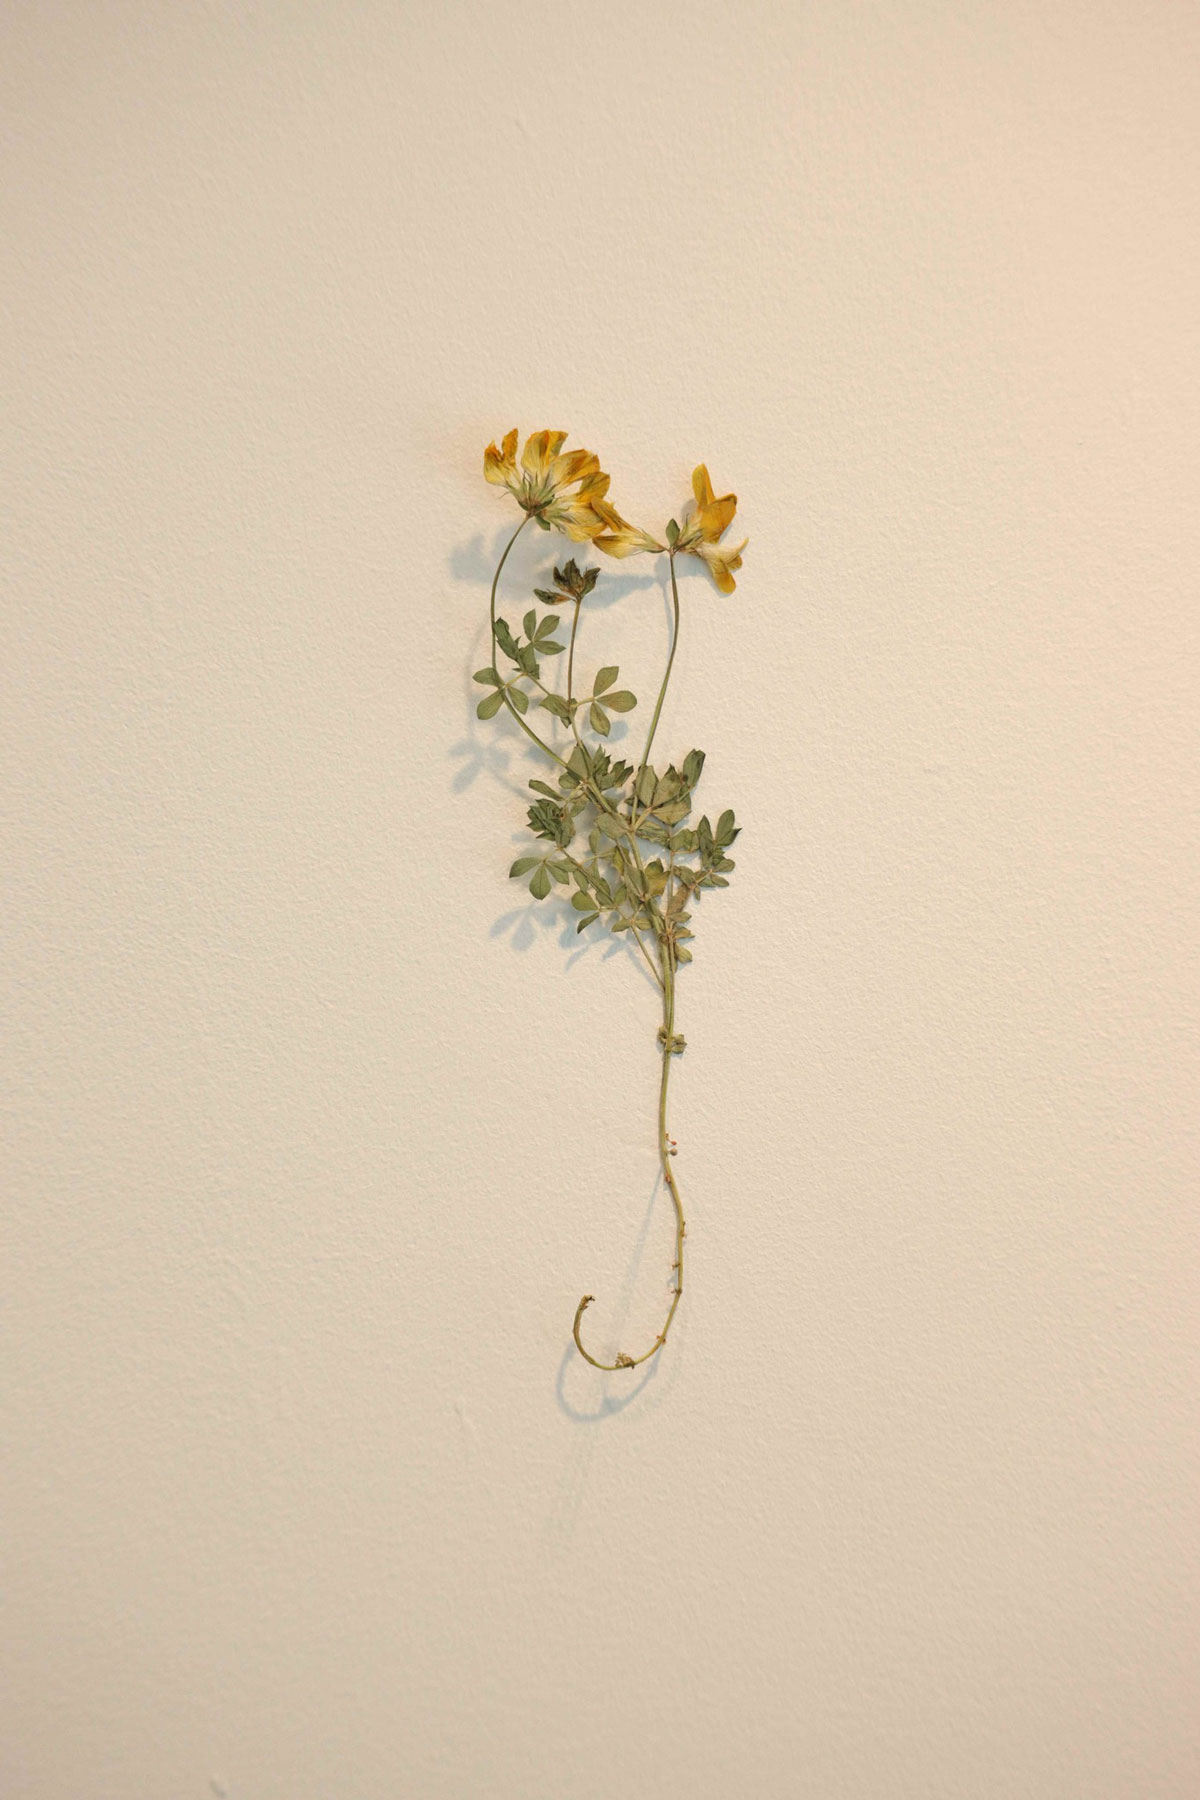 A flower attached a wall as part of Future Pasts installation.